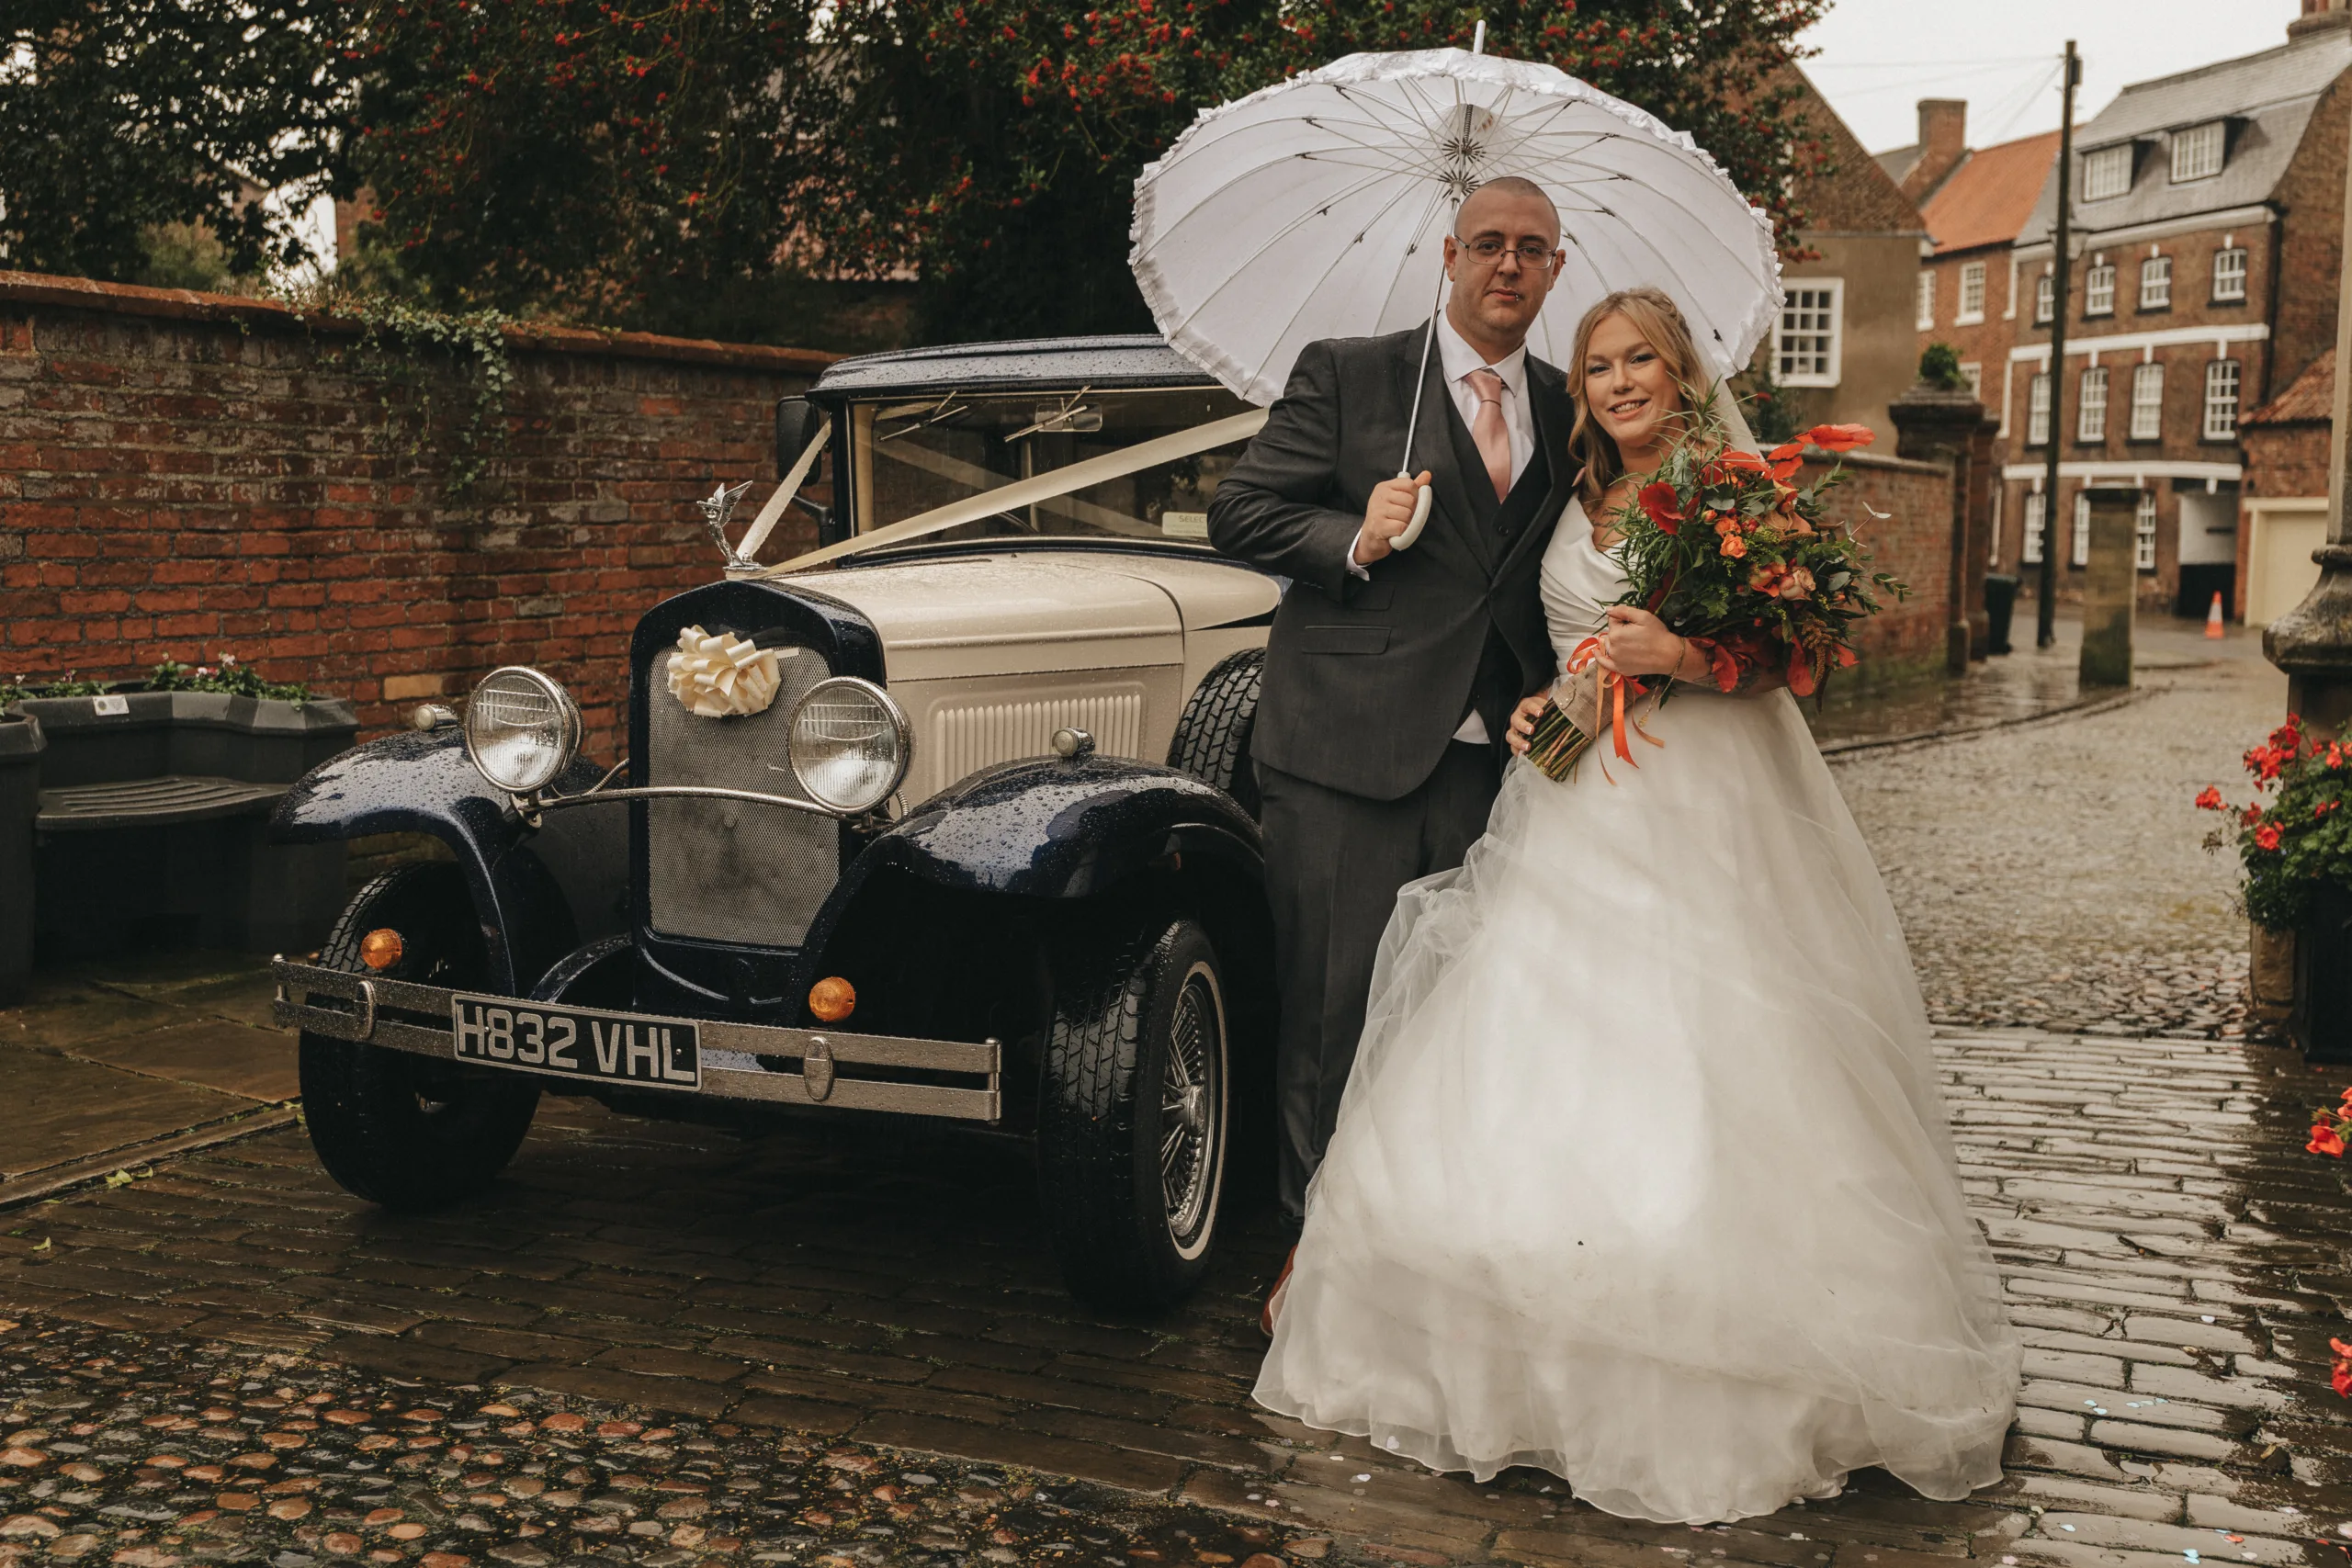 A wedding couple posing in front of an old car for their photographer.